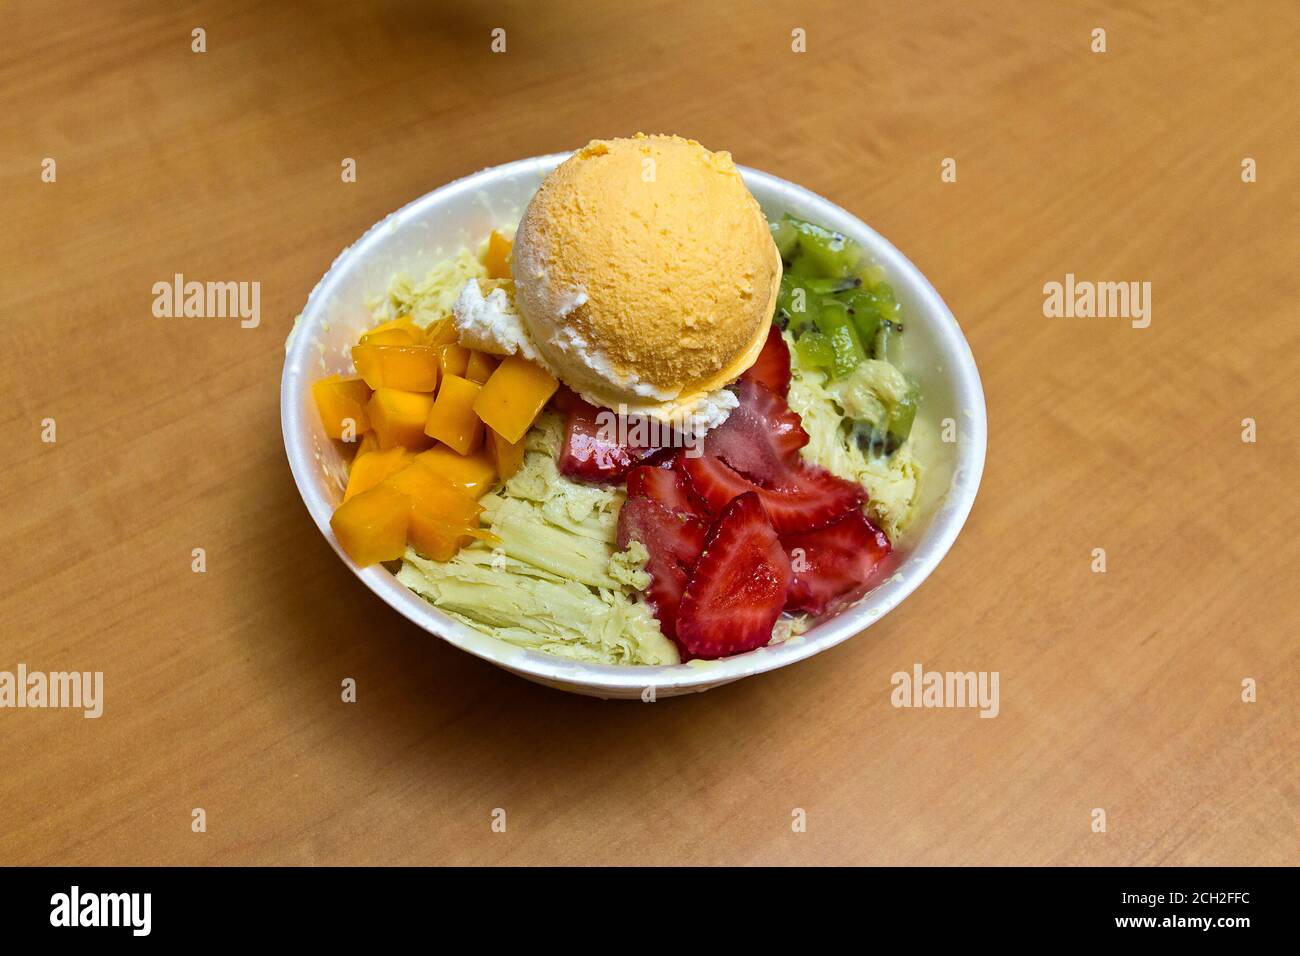 Frappe, a very popular Asian summer dish featuring flavored shaved ice with fruit and often a scoop of ice cream. This is green tea ice with mango and strawberries along with mango ice cream. Stock Photo